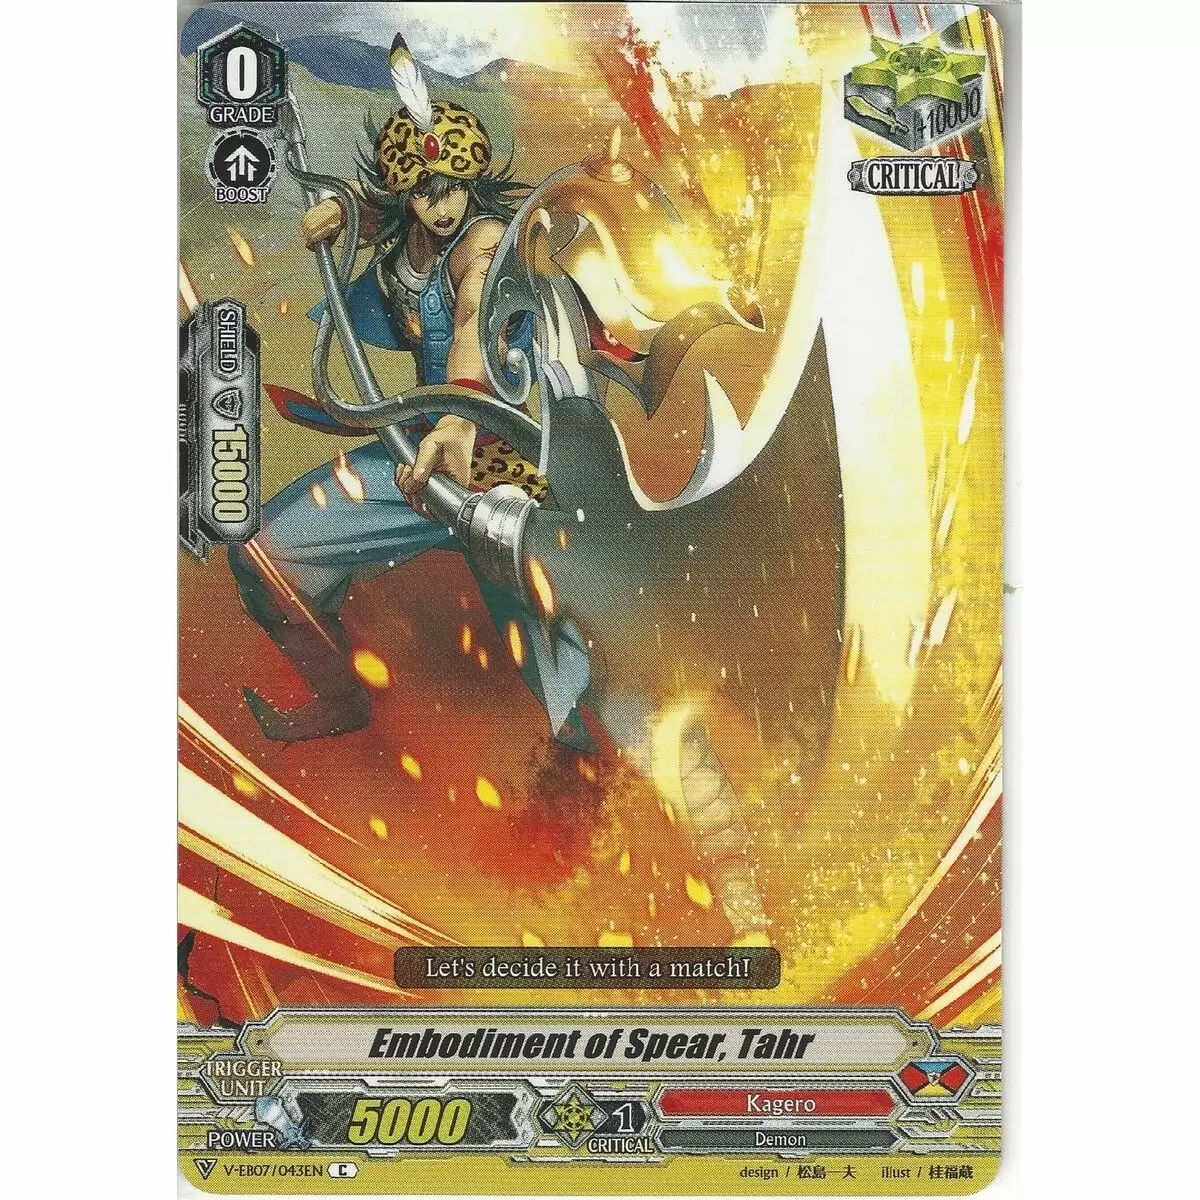 BT01 - Descent of the King of Knights - Embodiment of Spear, Tahr